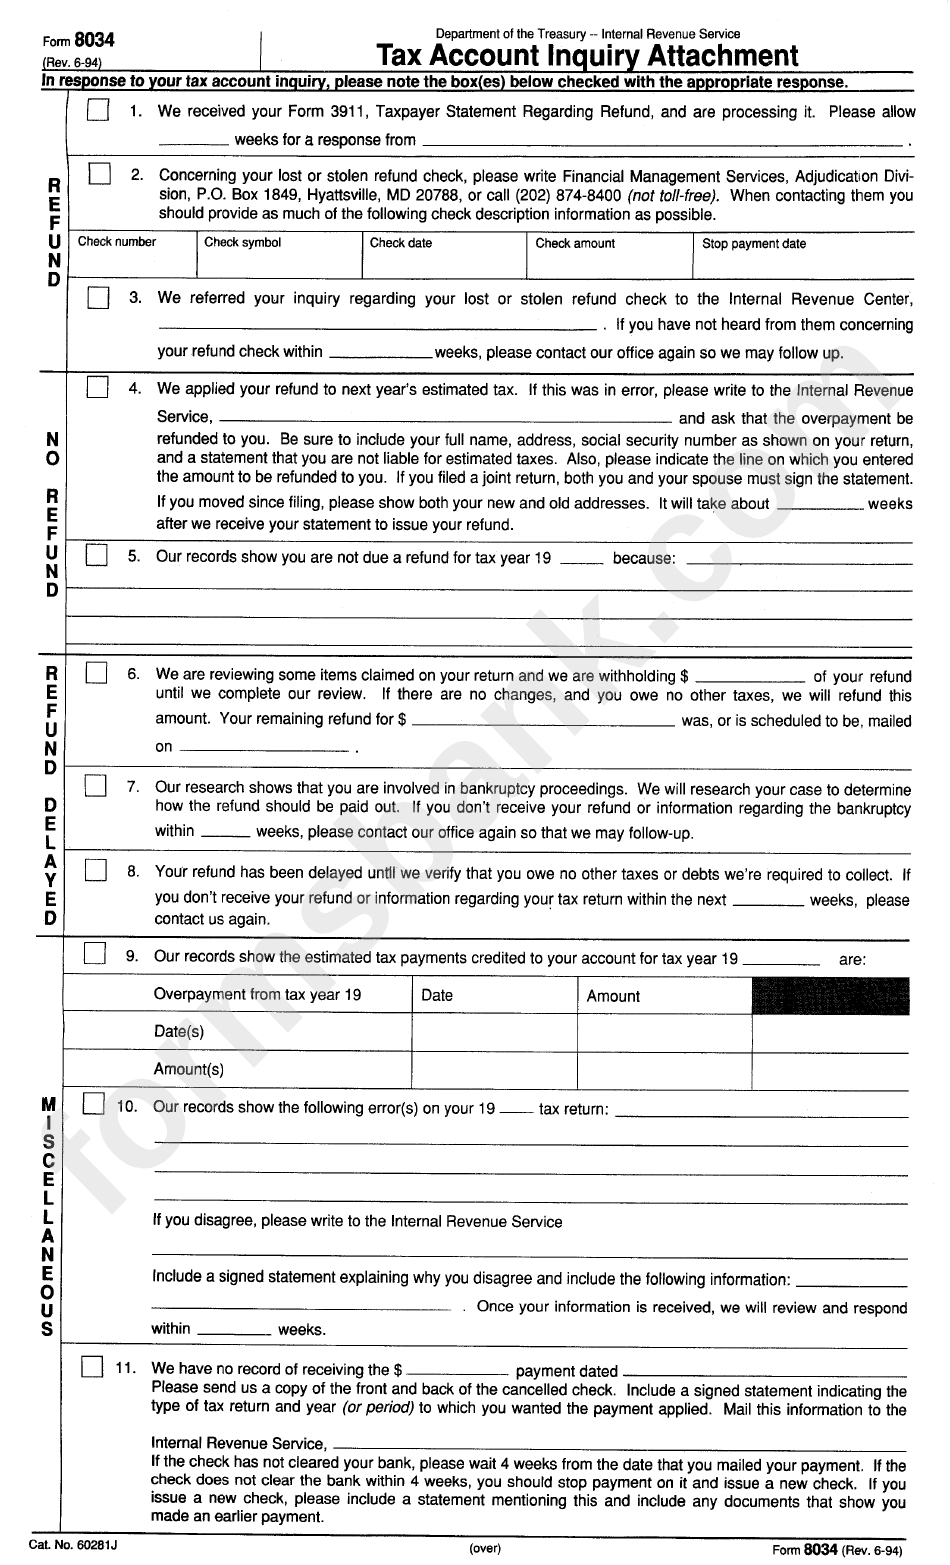 Form 8034 - Tax Account Inquiry Attachment Form